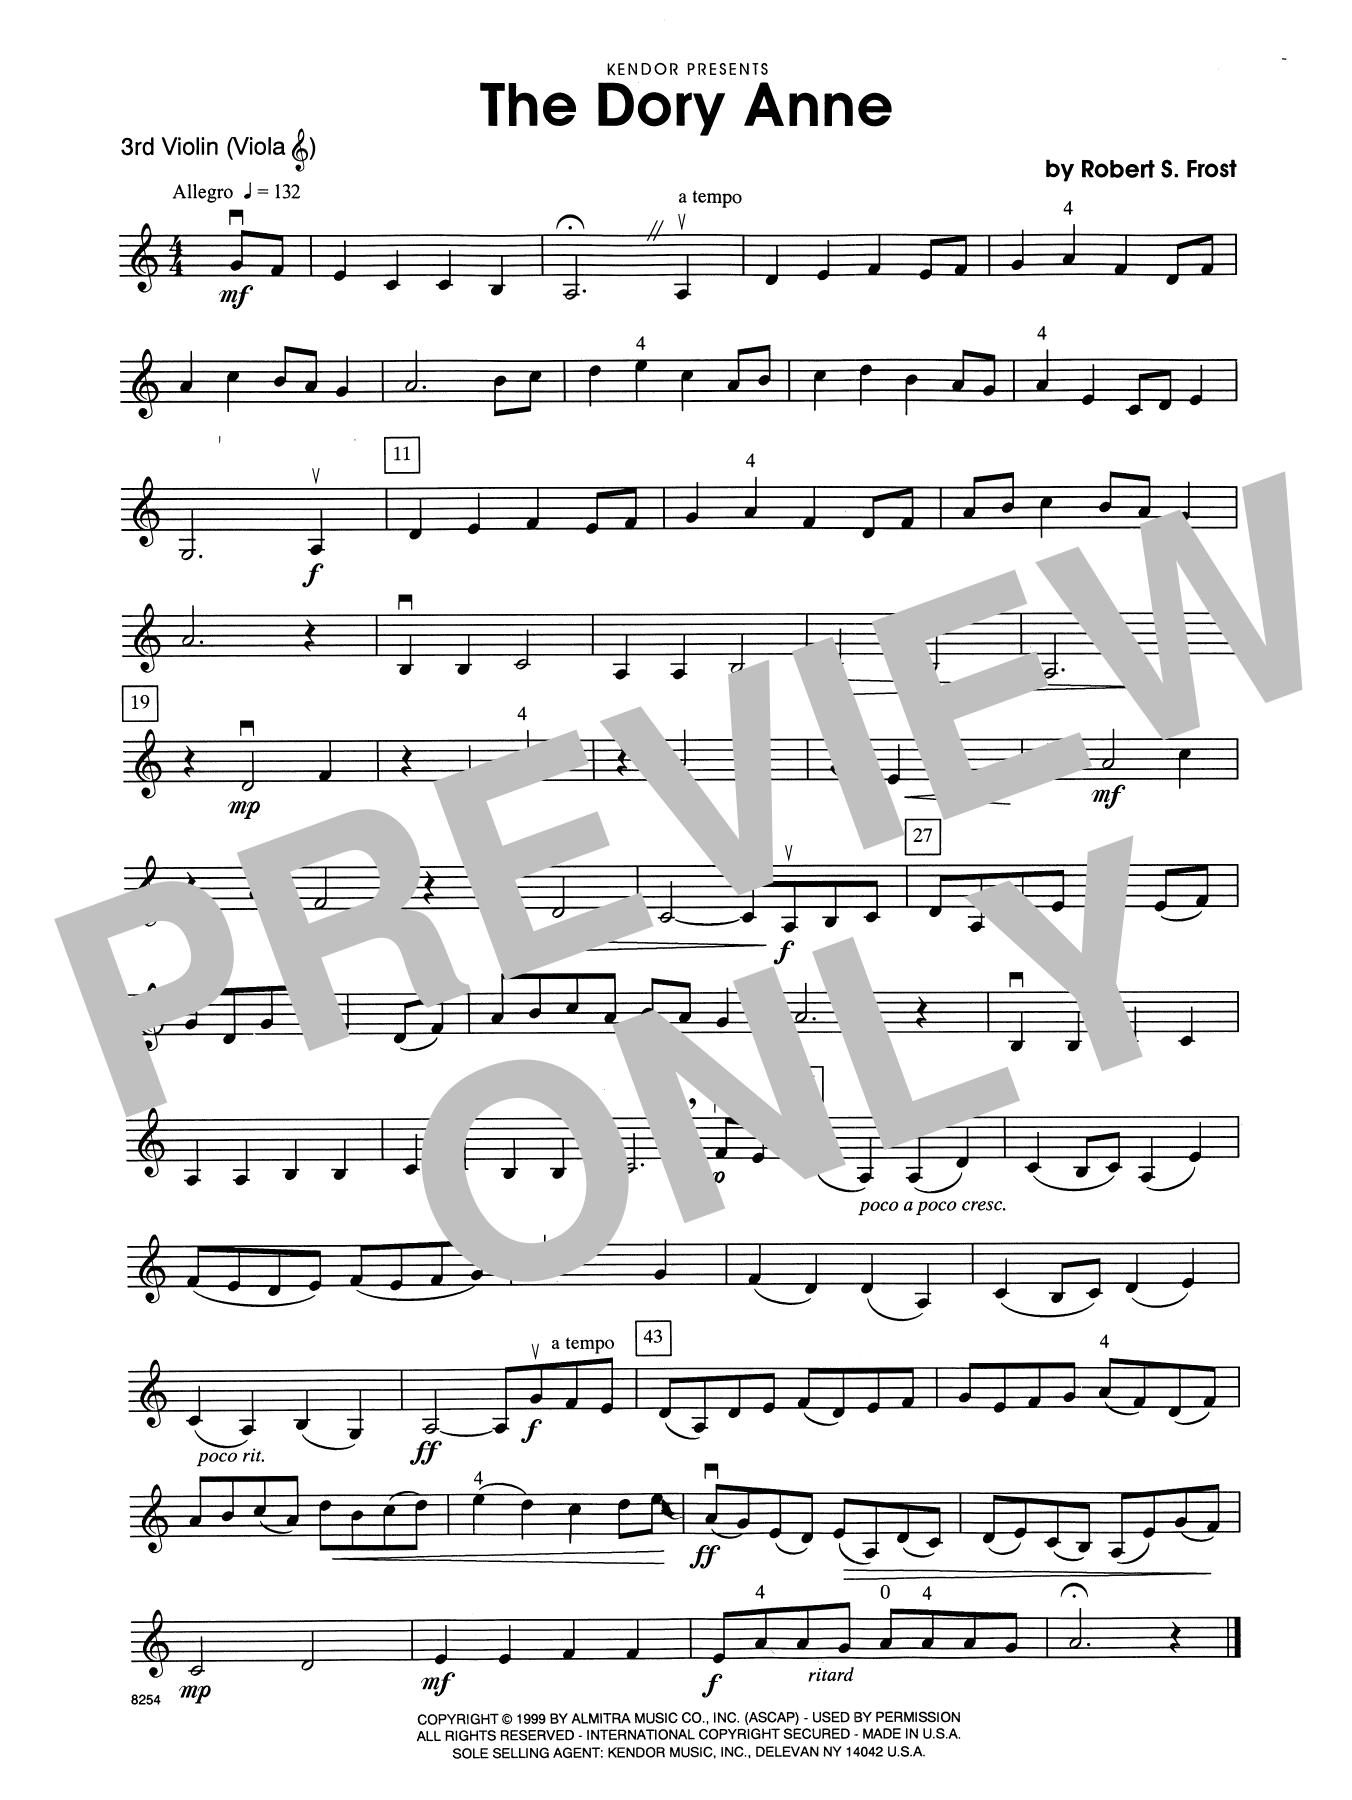 Download Robert S. Frost The Dory Anne - Violin 3 (Viola T.C.) Sheet Music